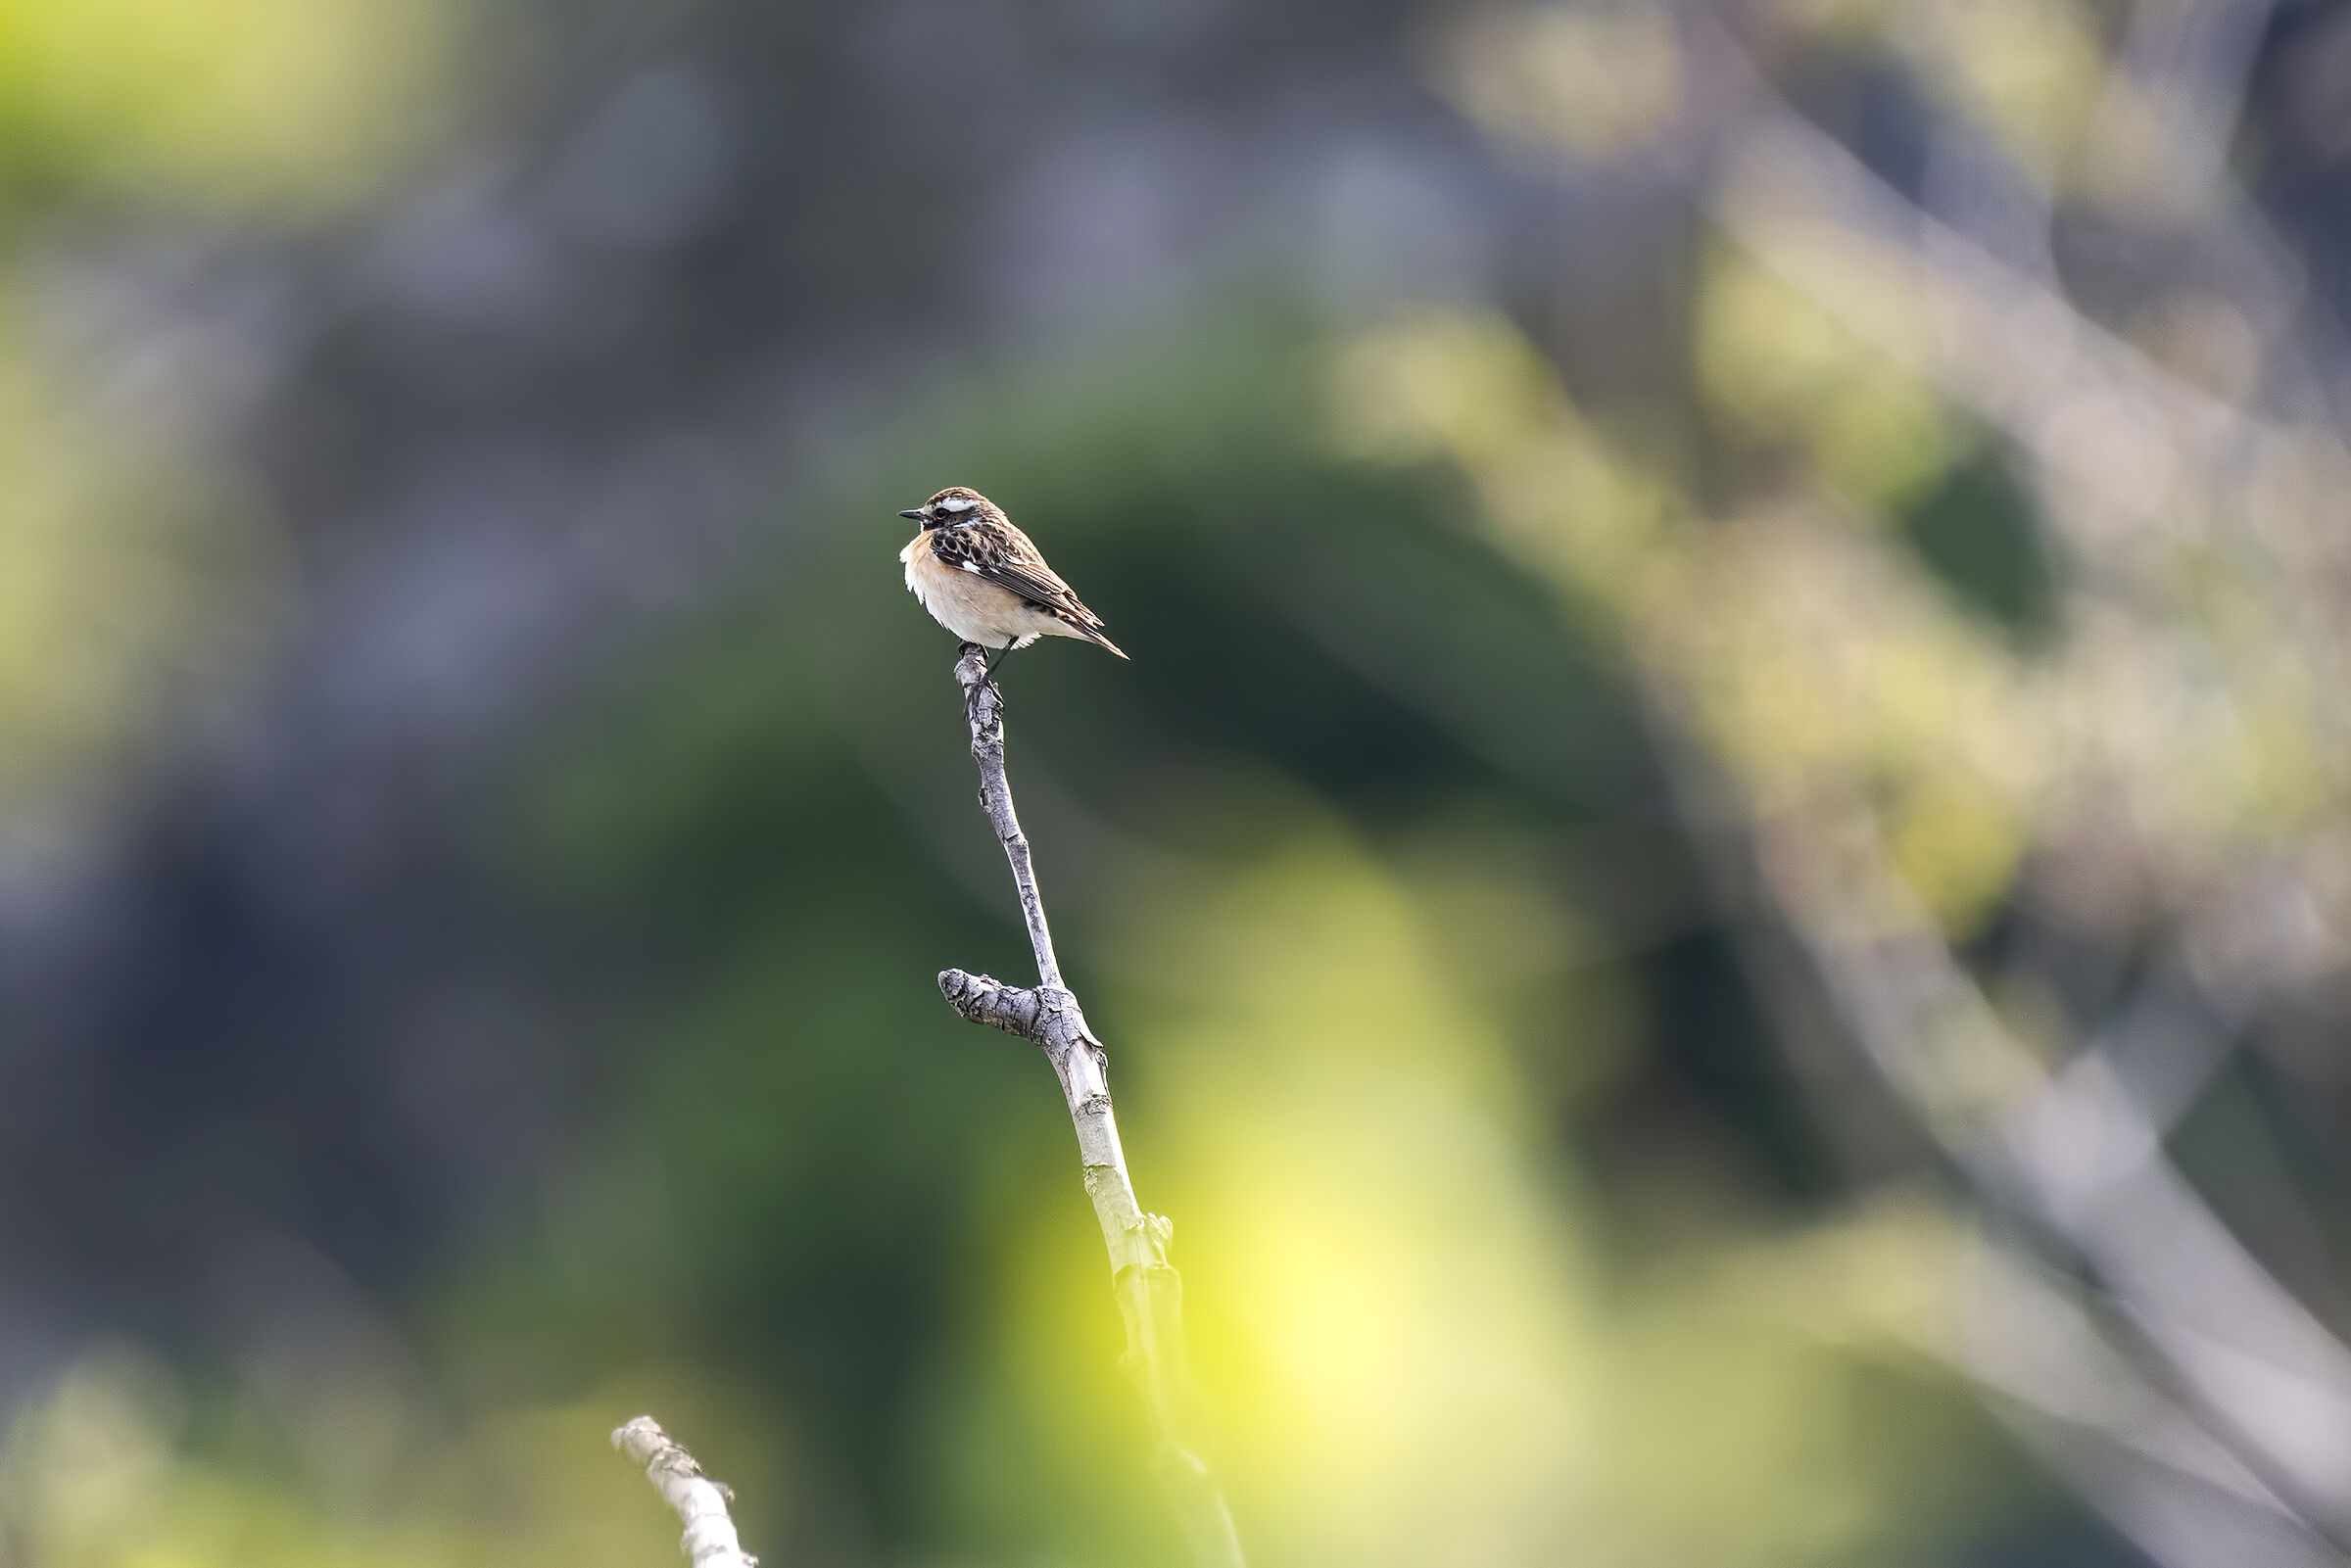 Spying on the Whinchat...